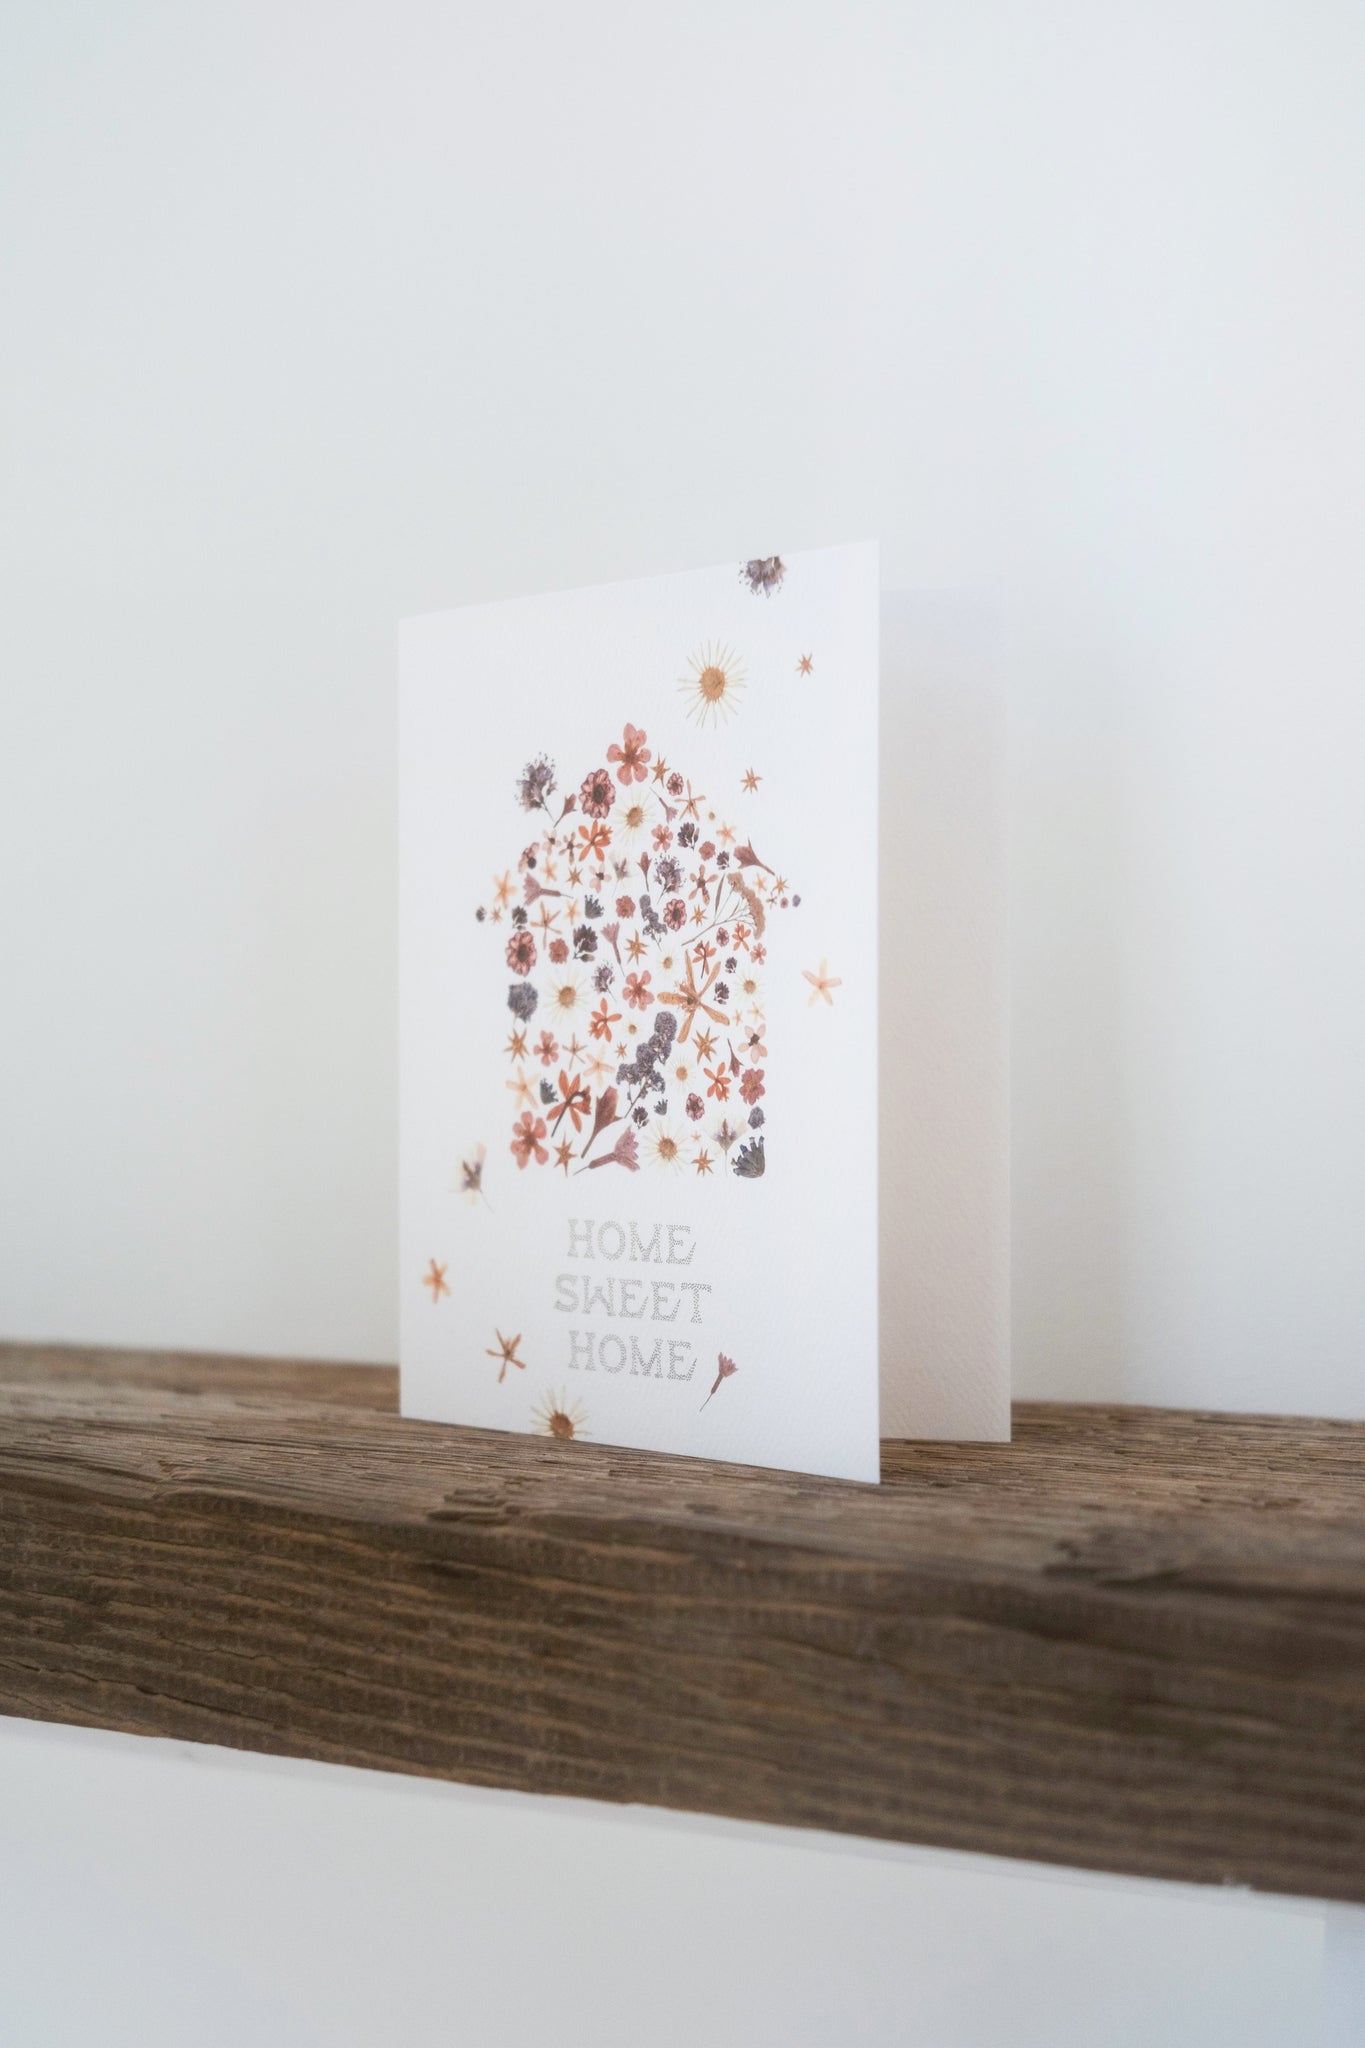 Cream colored background with pressed flowers scattered across dried flora constructed in the shape of a house with the words &quot;Home Sweet Home&quot; printed below. Shown on wood shelf with white background.